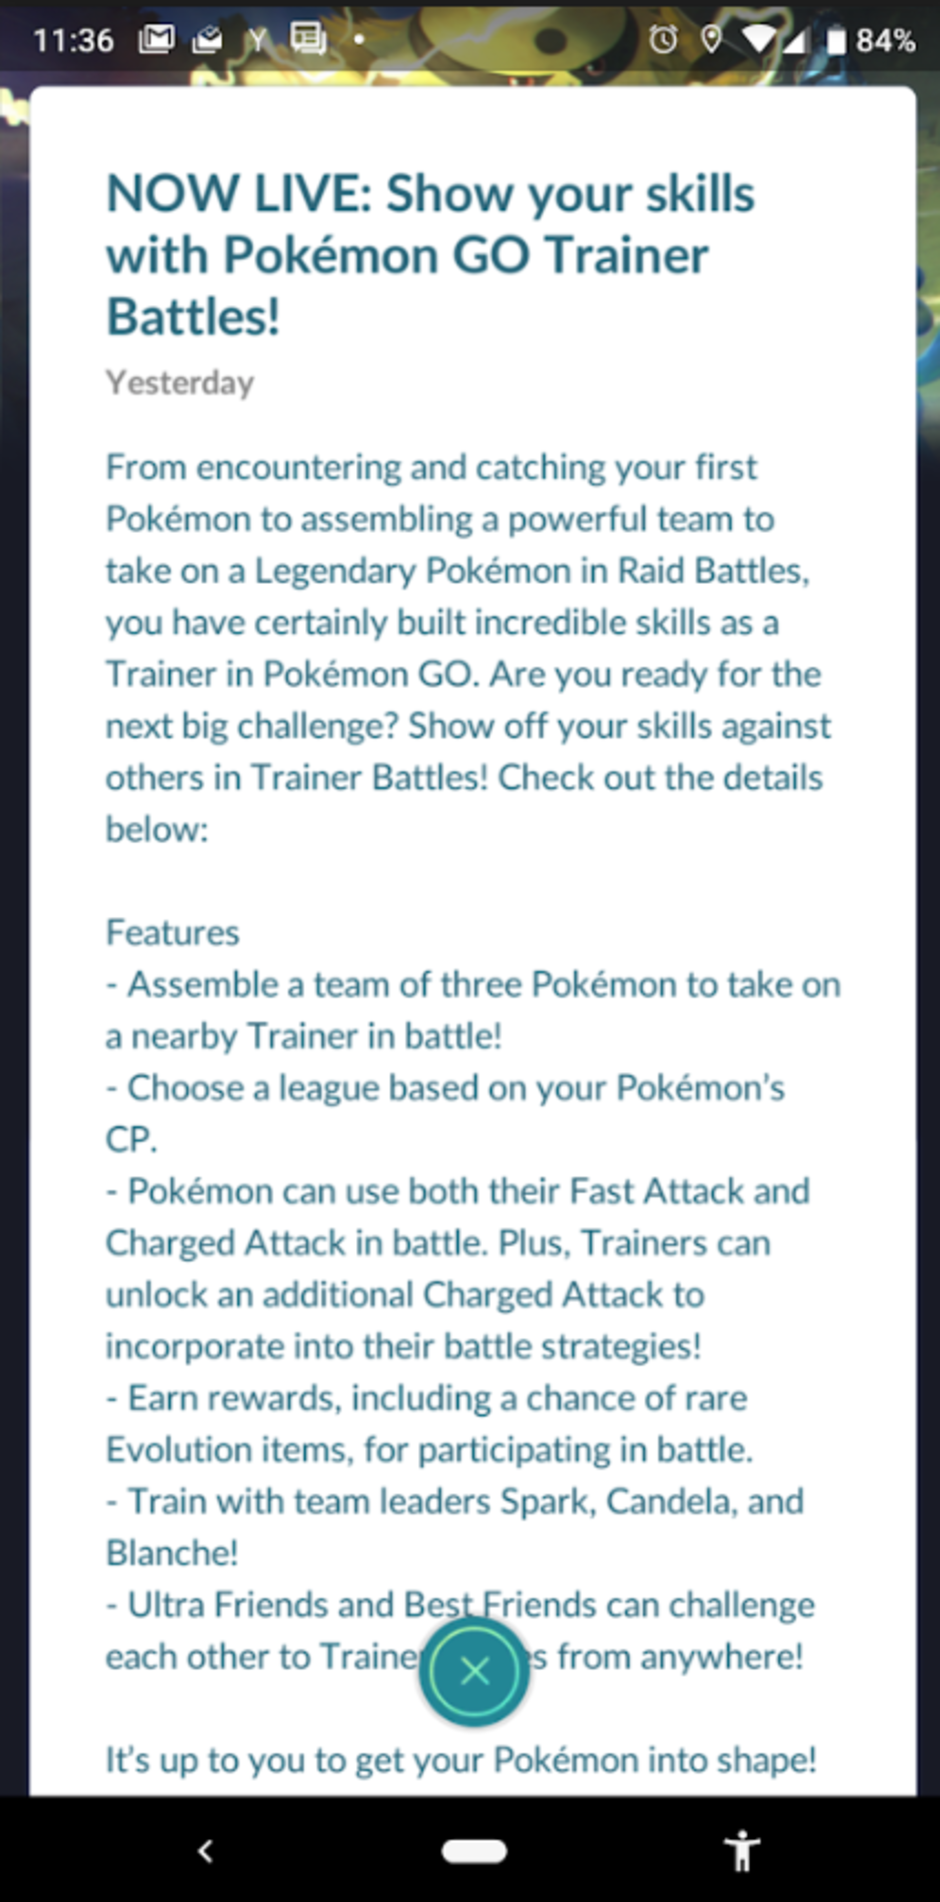 Pokemon trainers at Level 10 or higher can now participate in trainer vs. trainer battles - Pokemon GO players can now battle each other if they are Level 10 or higher